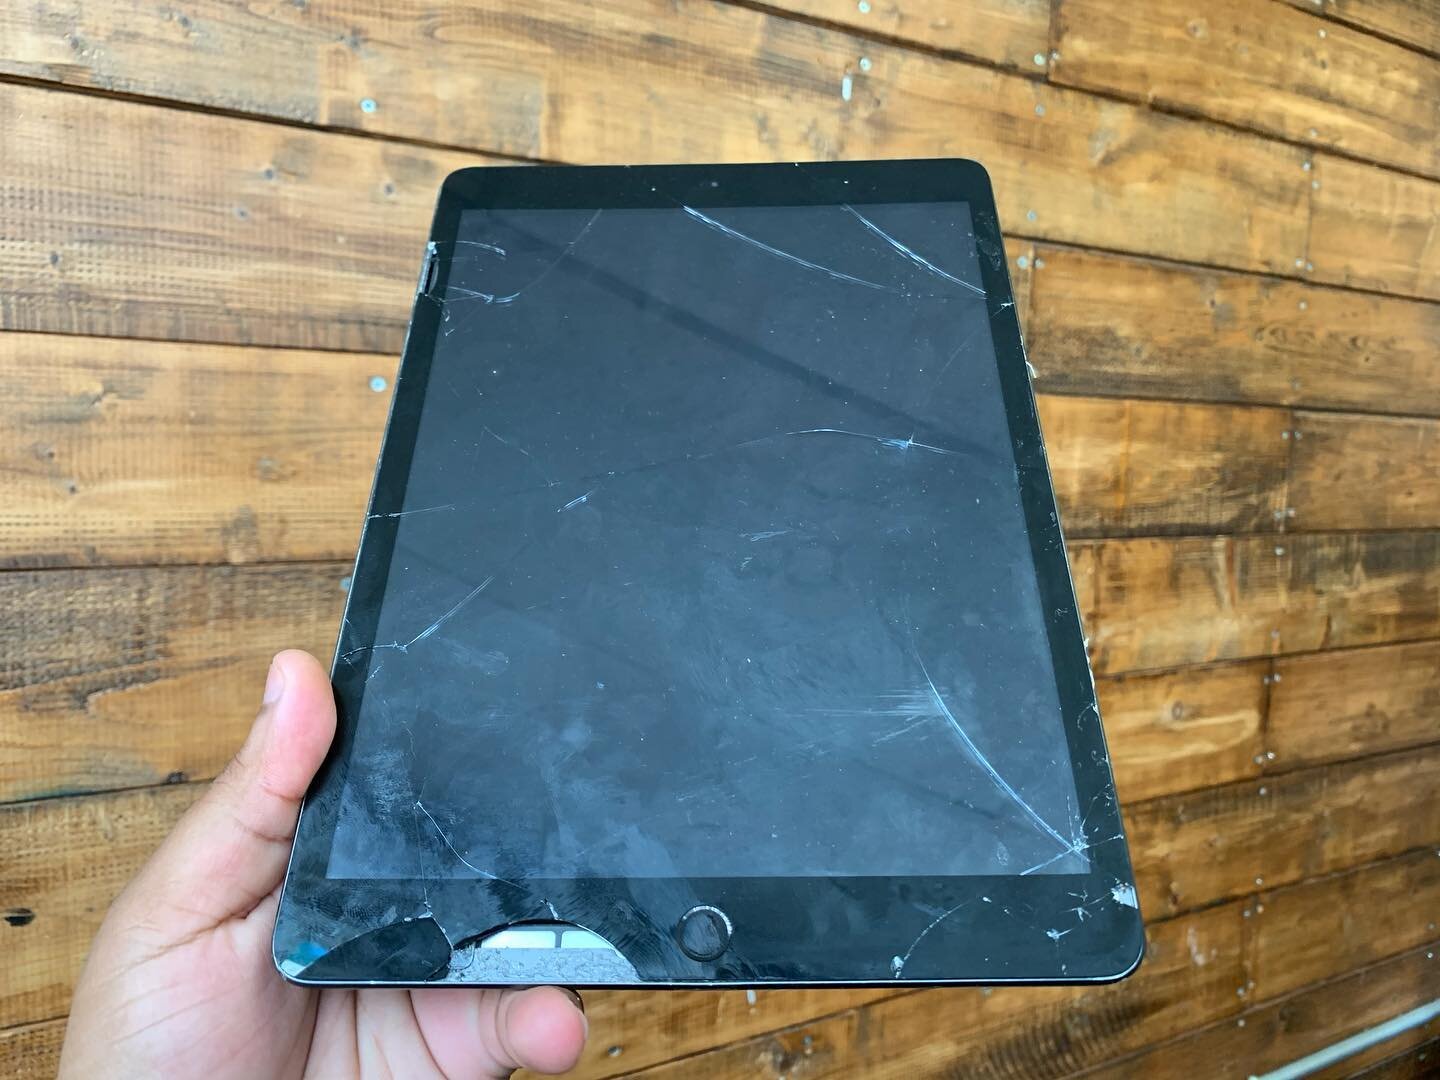 iPad 7th Gen Screen Repair for Eric. 📲Call, Text, or slide in our DMs to schedule an appointment. You have our permission.⭐️⭐️⭐️⭐️⭐️⠀⠀⠀⠀⠀⠀⠀⠀⠀⠀⠀⠀⠀⠀⠀⠀⠀⠀ ⠀⠀⠀⠀⠀⠀⠀⠀⠀⠀⠀⠀⠀⠀⠀⠀⠀⠀
💻 EzekielTech
📲: (845) 857-5760 ⠀⠀⠀⠀⠀⠀⠀⠀⠀⠀⠀⠀⠀⠀⠀⠀⠀⠀⠀⠀ 🌎:www.Ezekiel.tech
🔛Fa